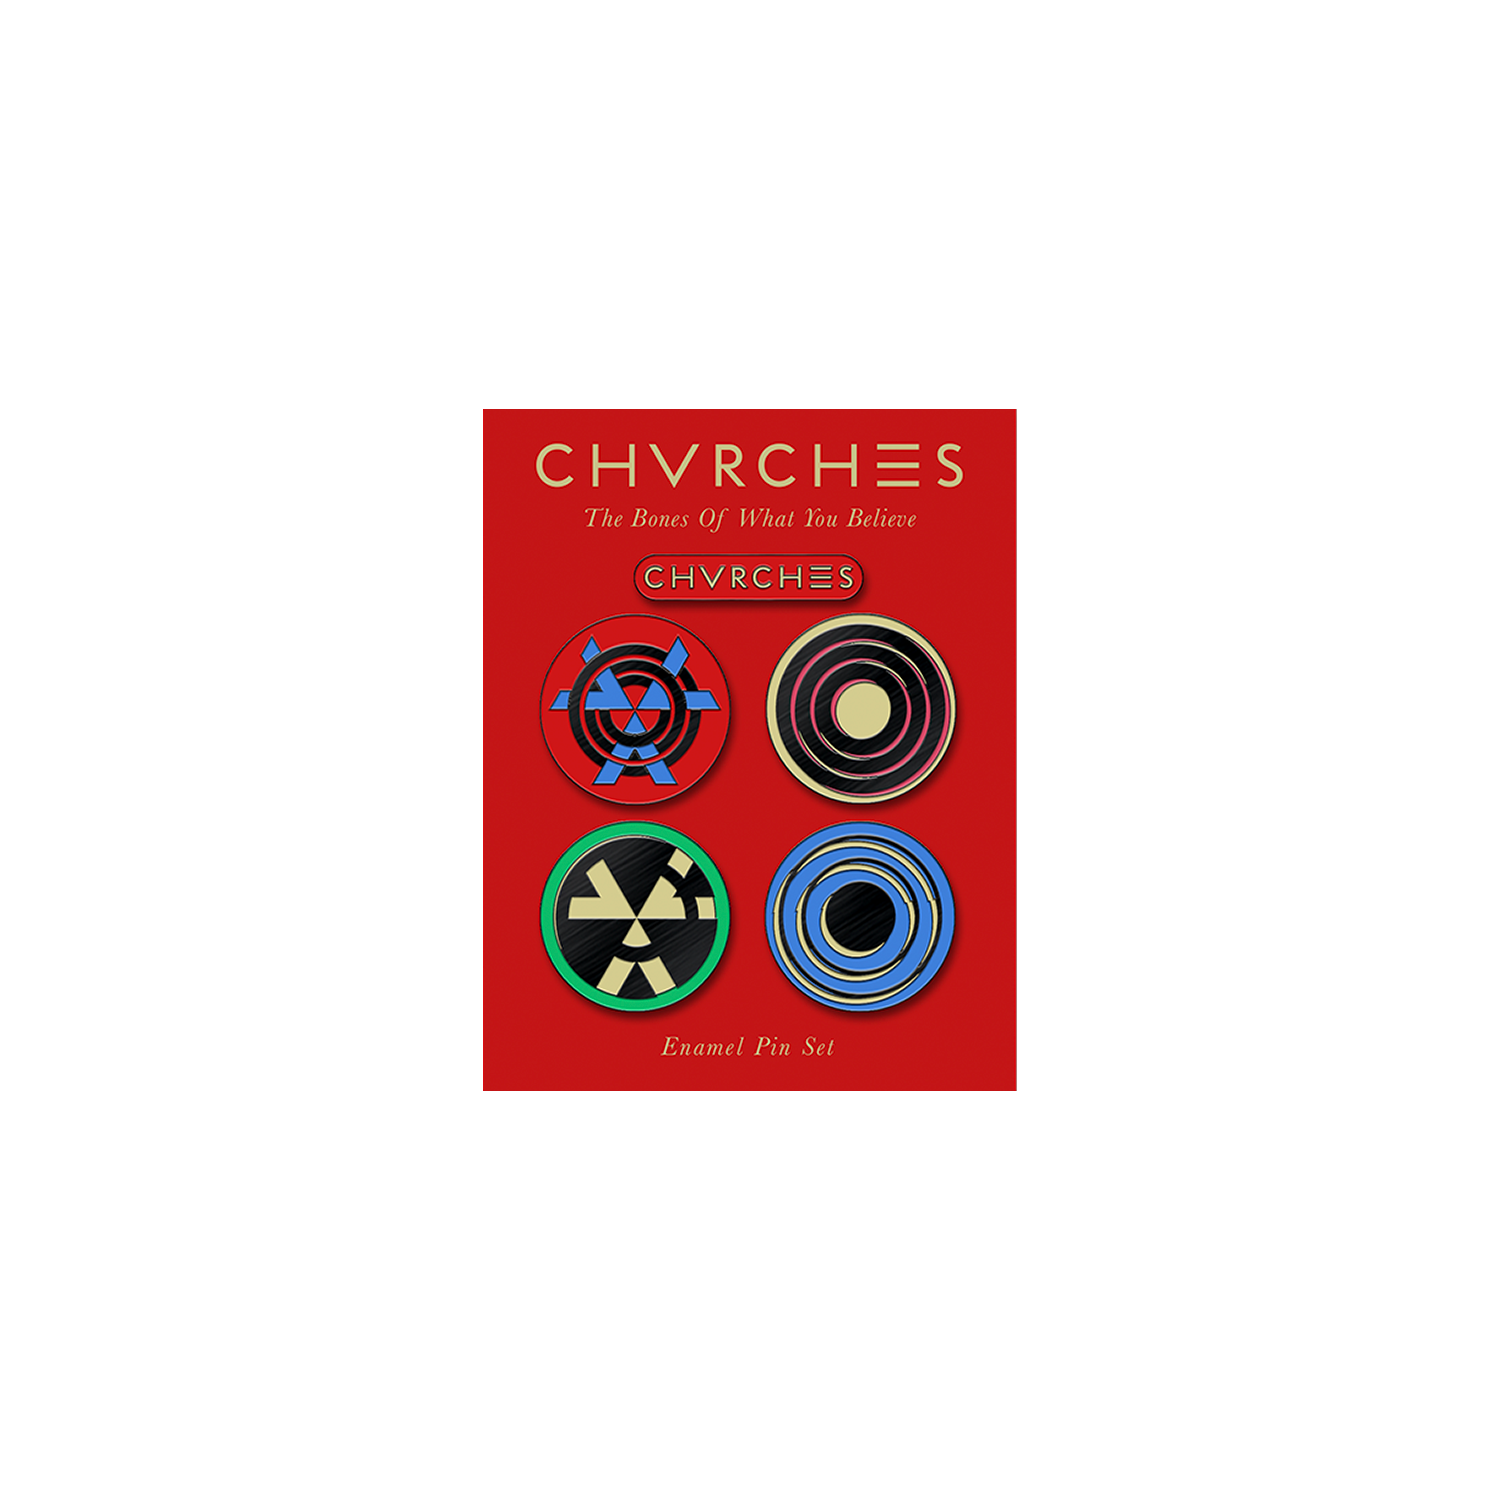 Official CHVRCHES Merchandise. Full color, 5 piece enamel pin set featuring art from The Bones of What You Believe album cover.